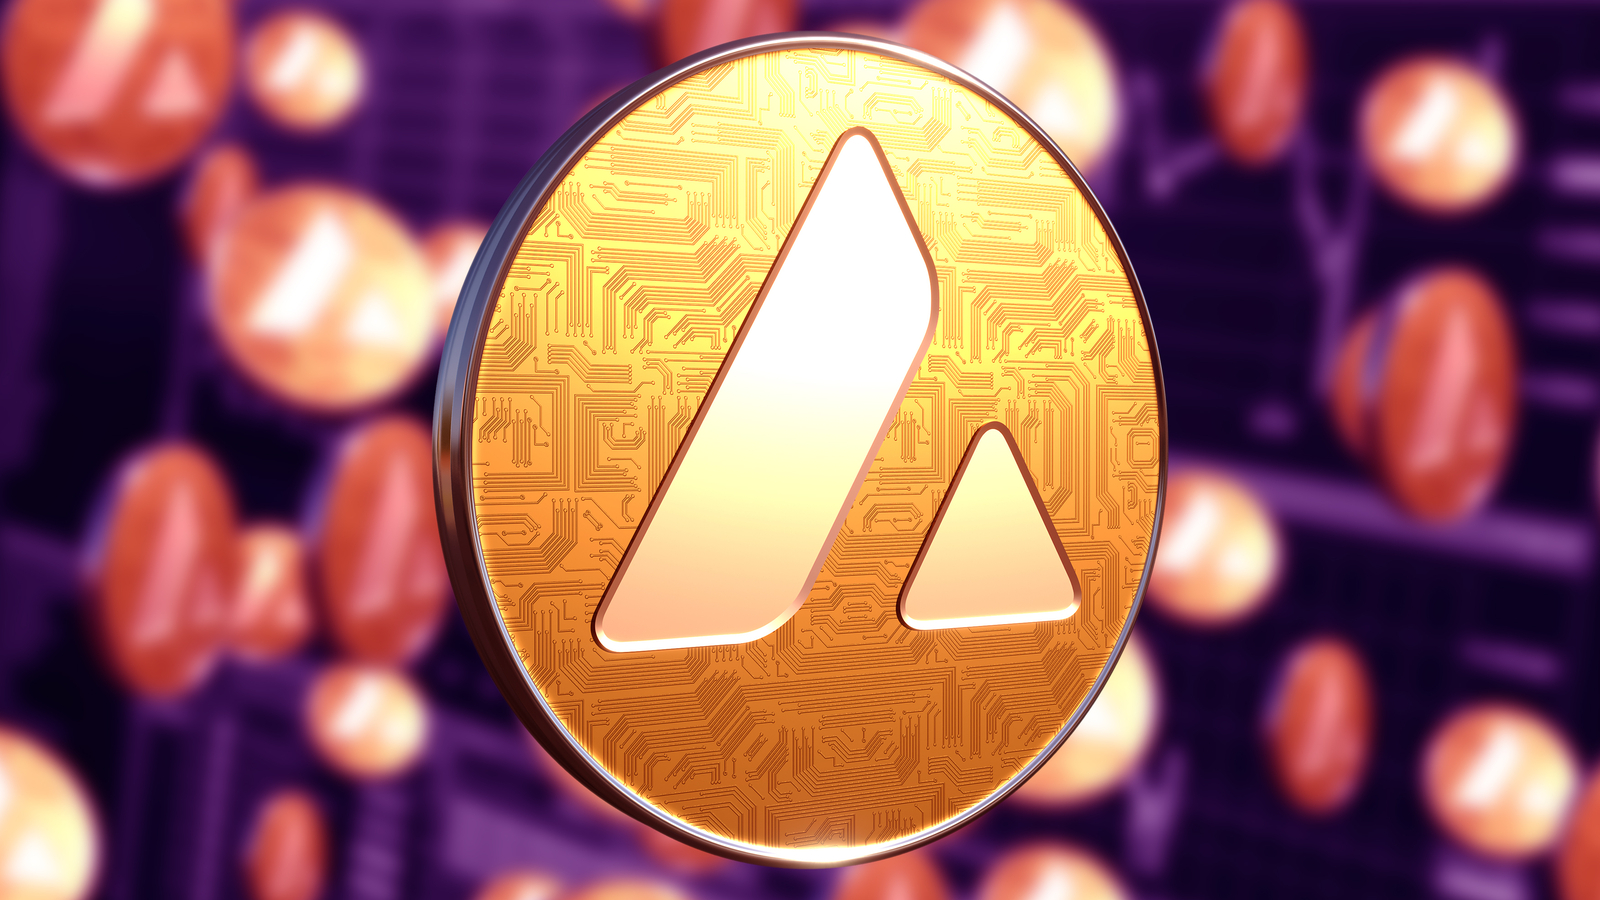 Gold Avalanche (AVAX) cryptocurrency concept coin depicting avalanche price prediction.